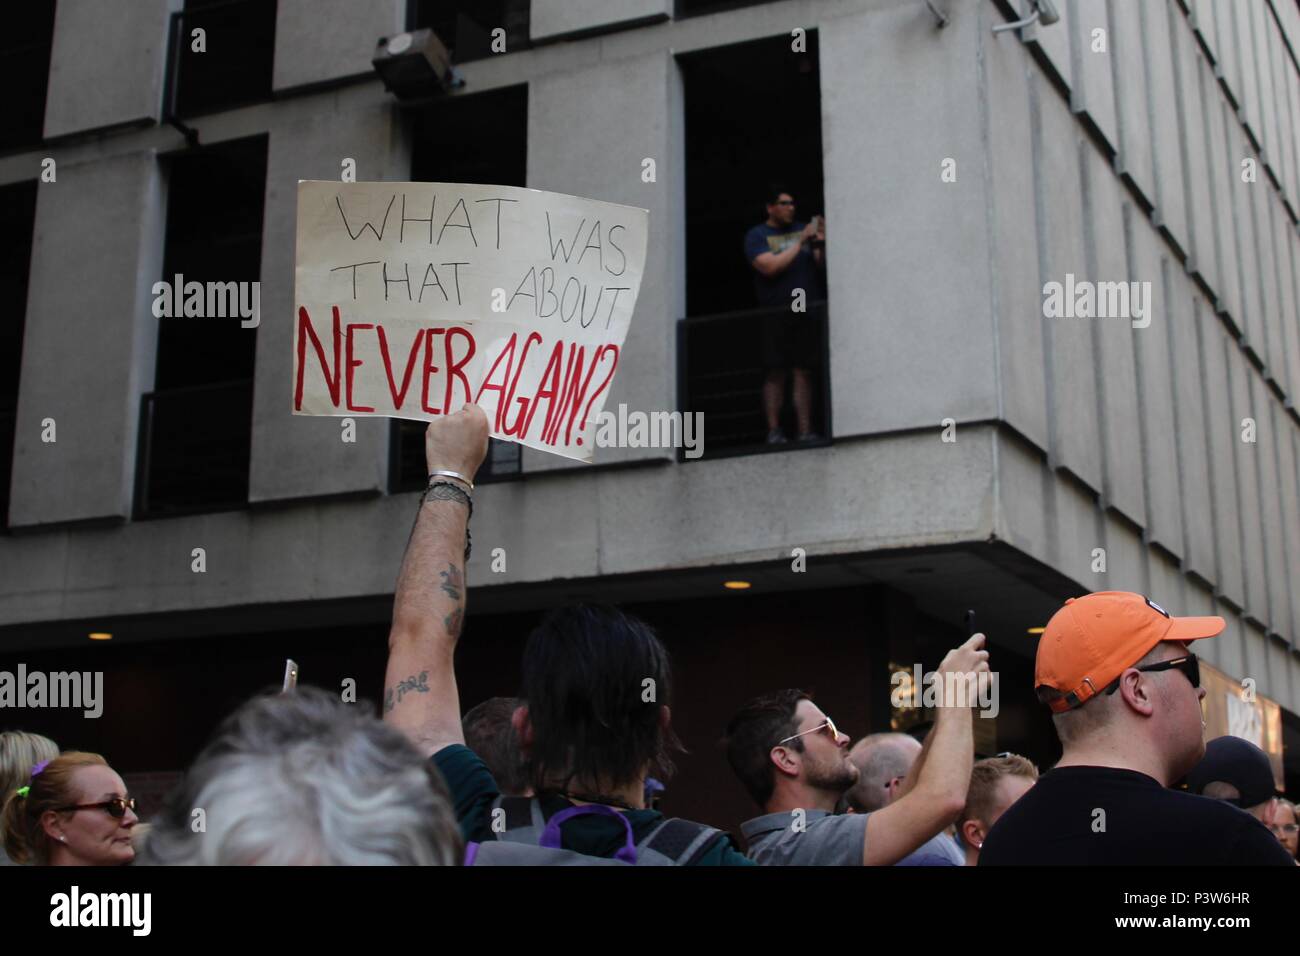 Philadelphia, PA, USA - June 19, 2018: A protester holds up a Never Again sign as thousands protest the Trump Administration policy of separating immigrant children and their parents at the U.S - Mexico border. Credit: Jana Shea/Alamy Live News Stock Photo